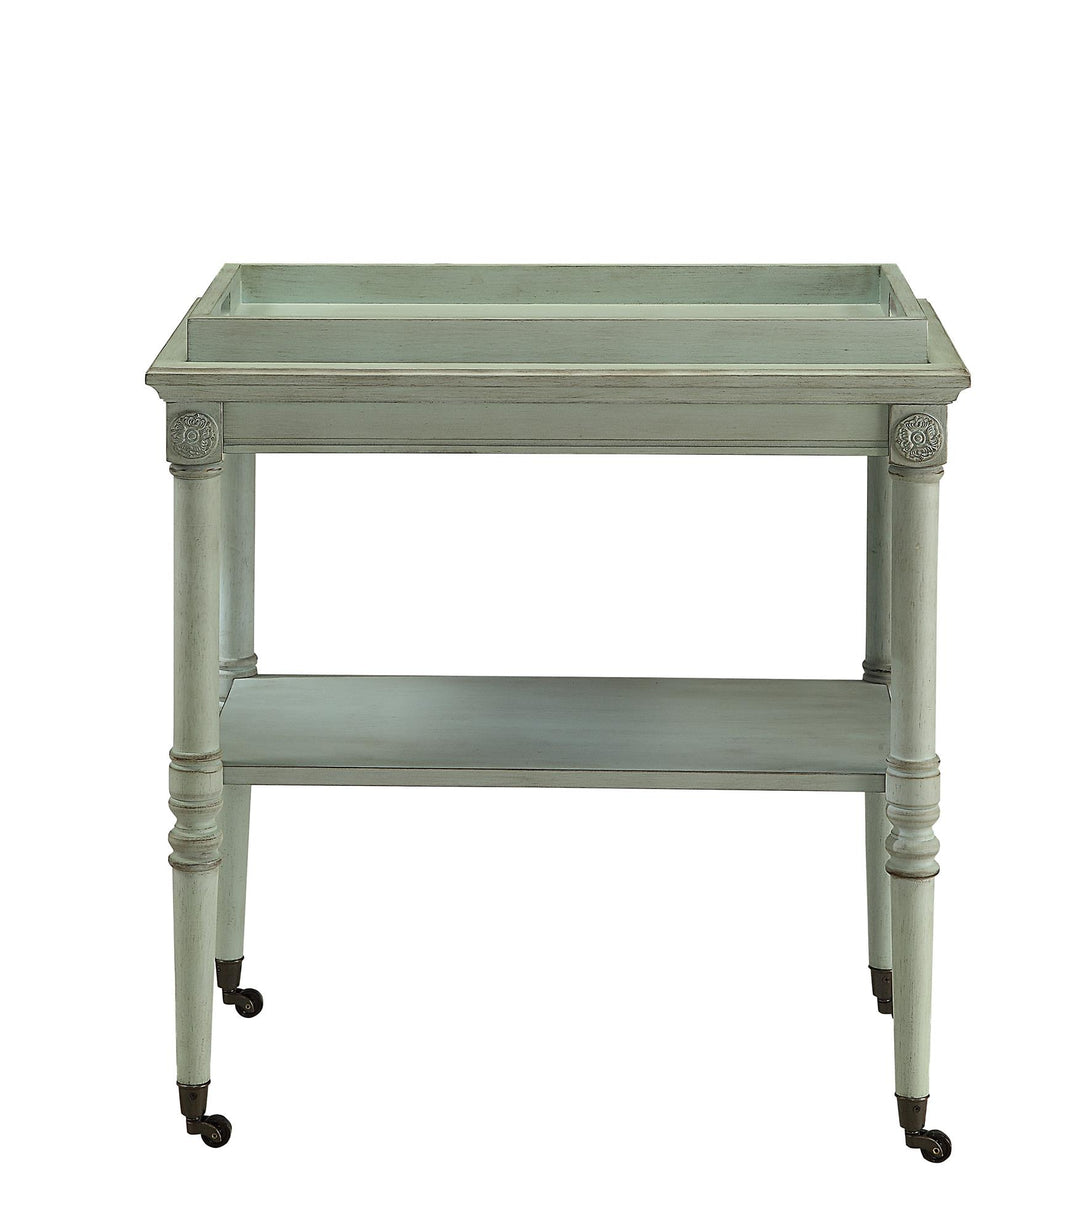 Orla Rectangular Serving Cart with Removable Tray - Green